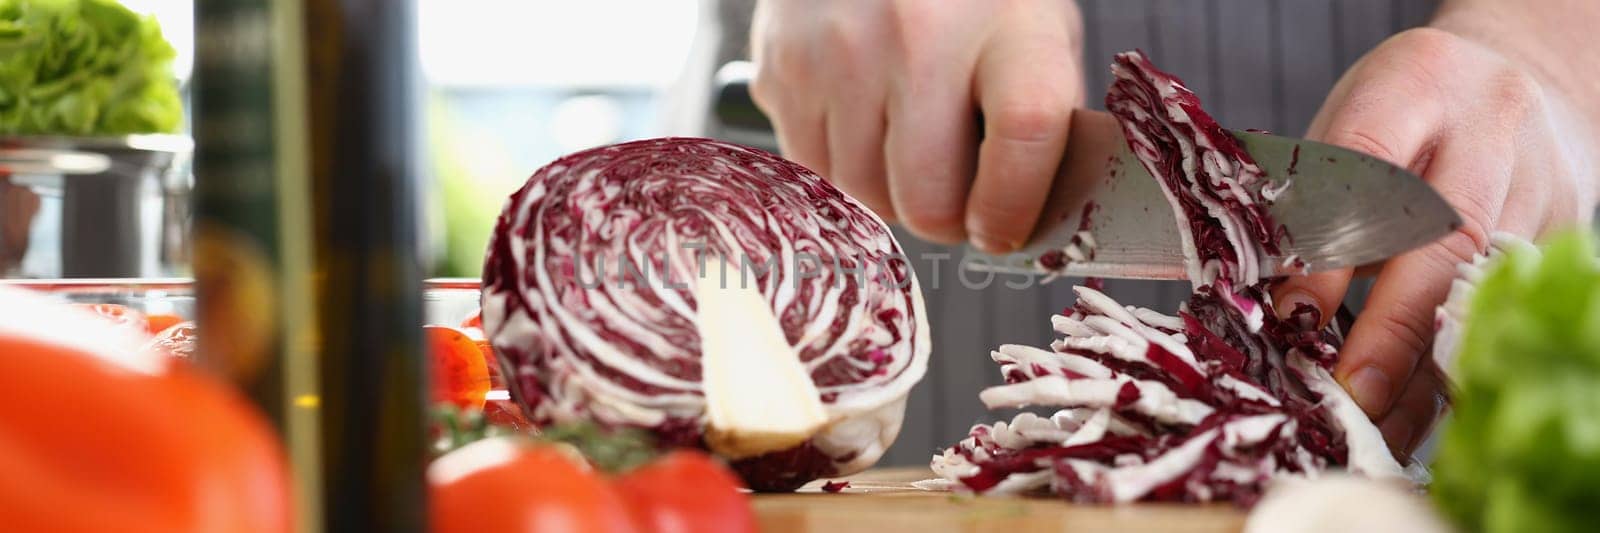 Closeup of a male cook hand using knife slicing fresh red cabbage on cutting board in kitchen at home by kuprevich